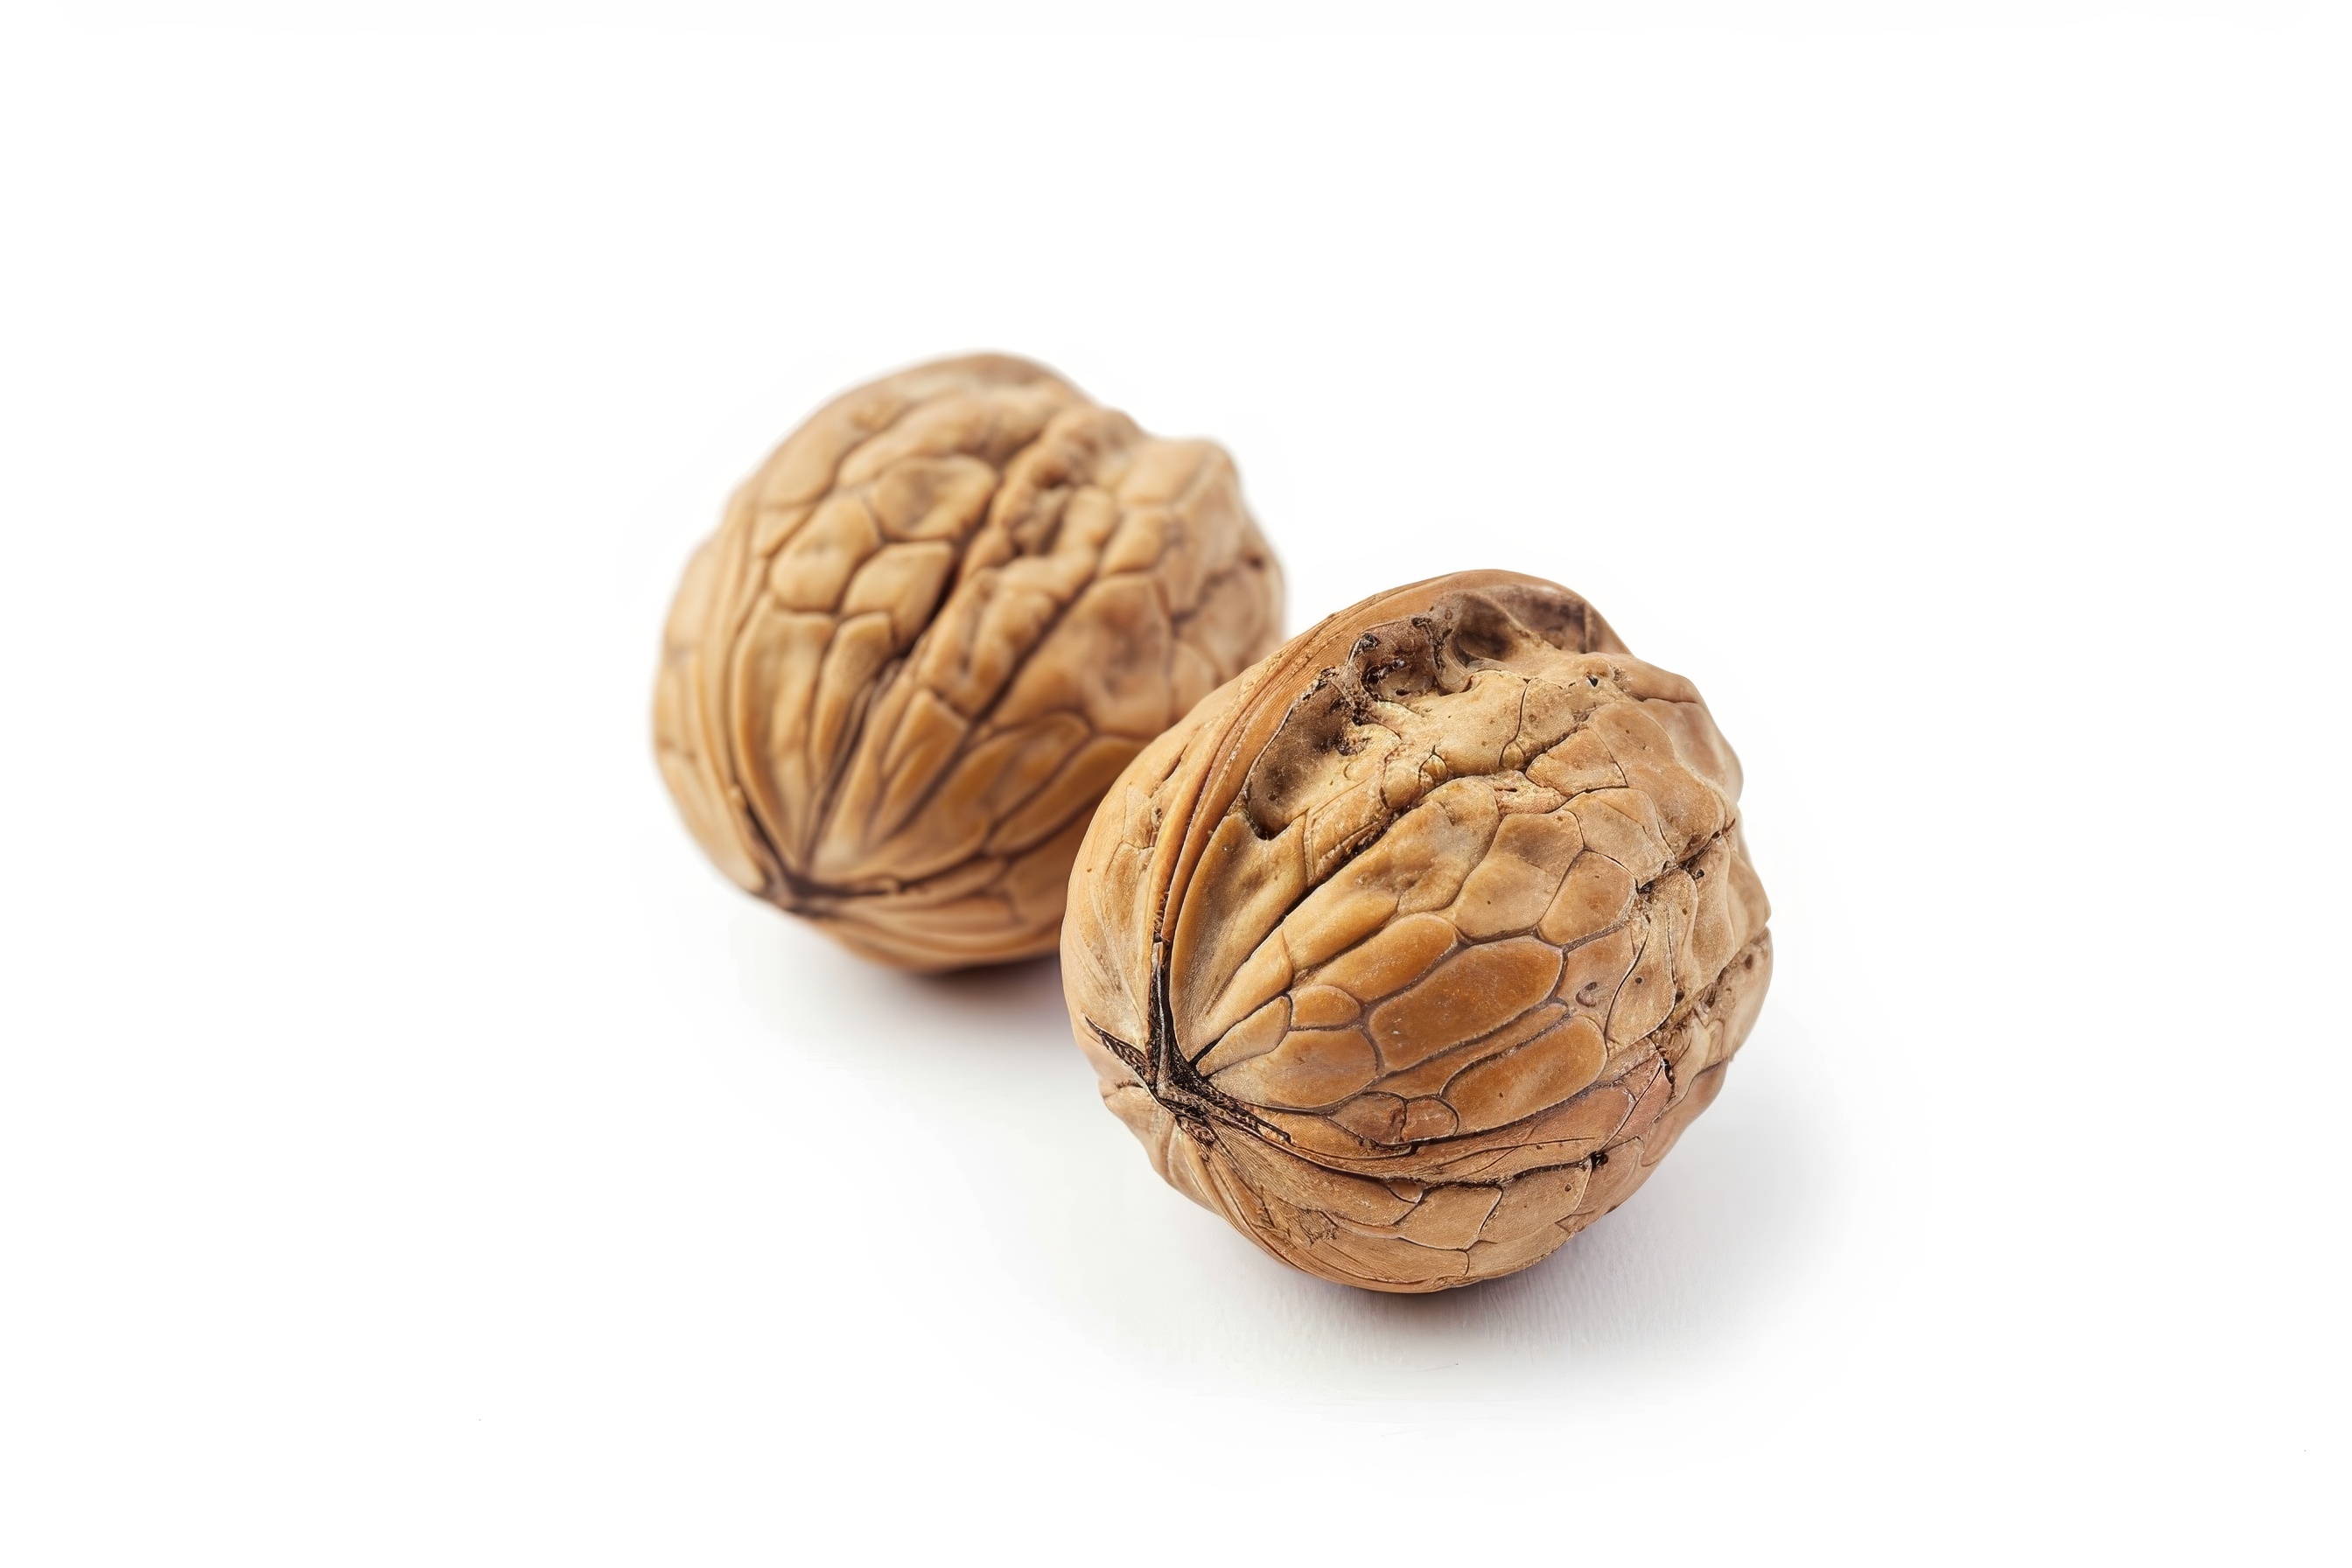 Two walnuts closeup on a white background